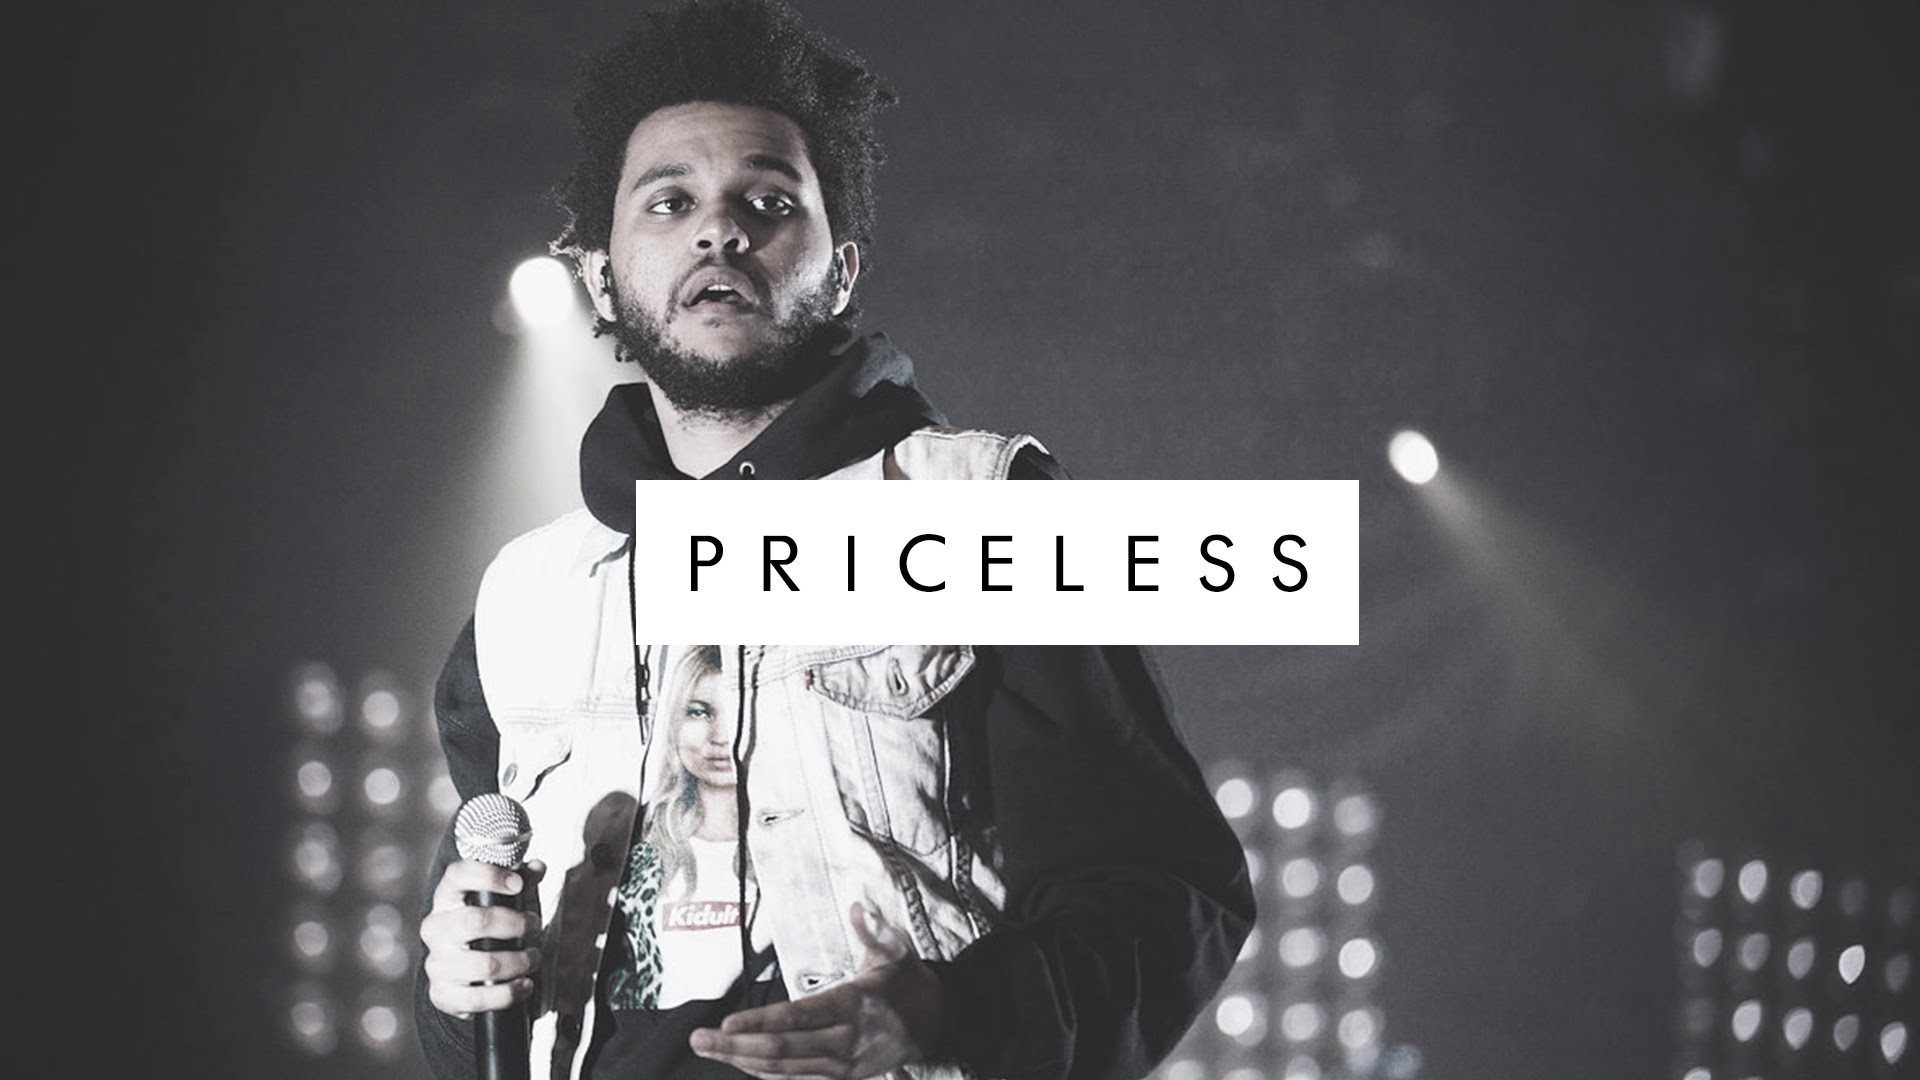 Drake x Partynextdoor x The weeknd Type Beat – Priceless Prod. By Accent beats – YouTube